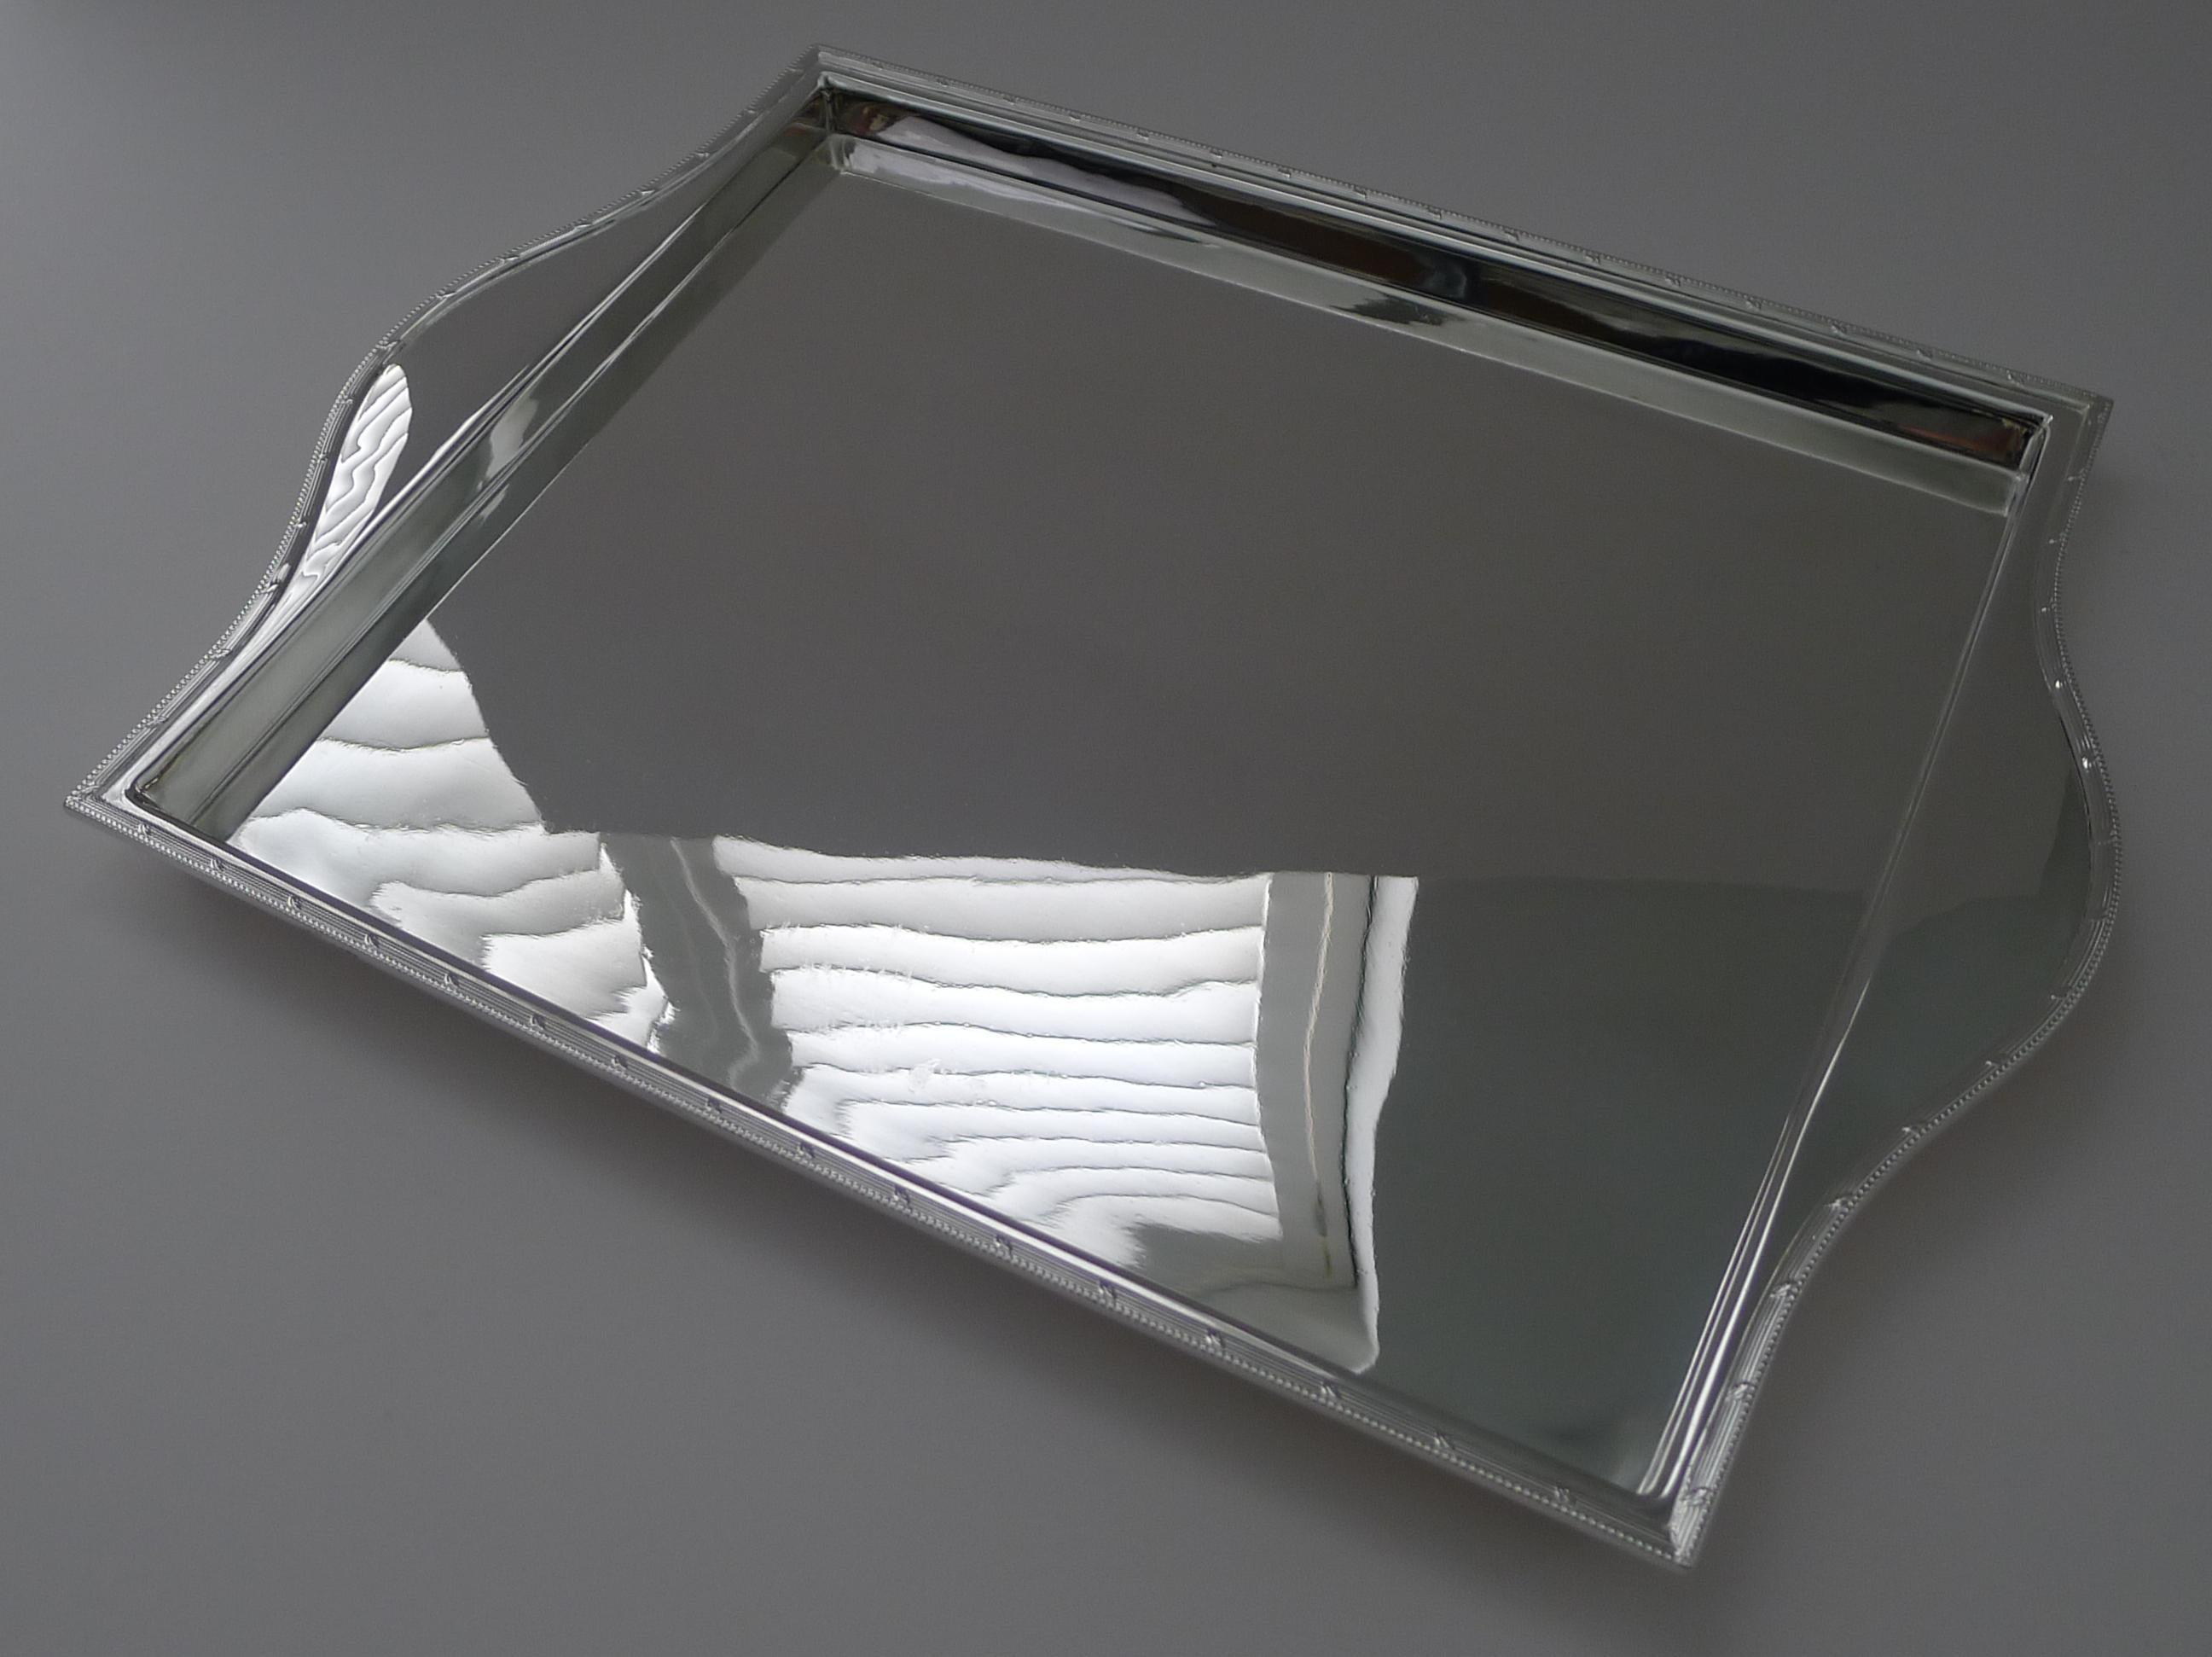 A simple and highly stylish English cocktail tray made from silver plate with an integral handle to each side and an elegant raised border.

The tray has just been returned from our silversmith where it has been professionally cleaned and polished,